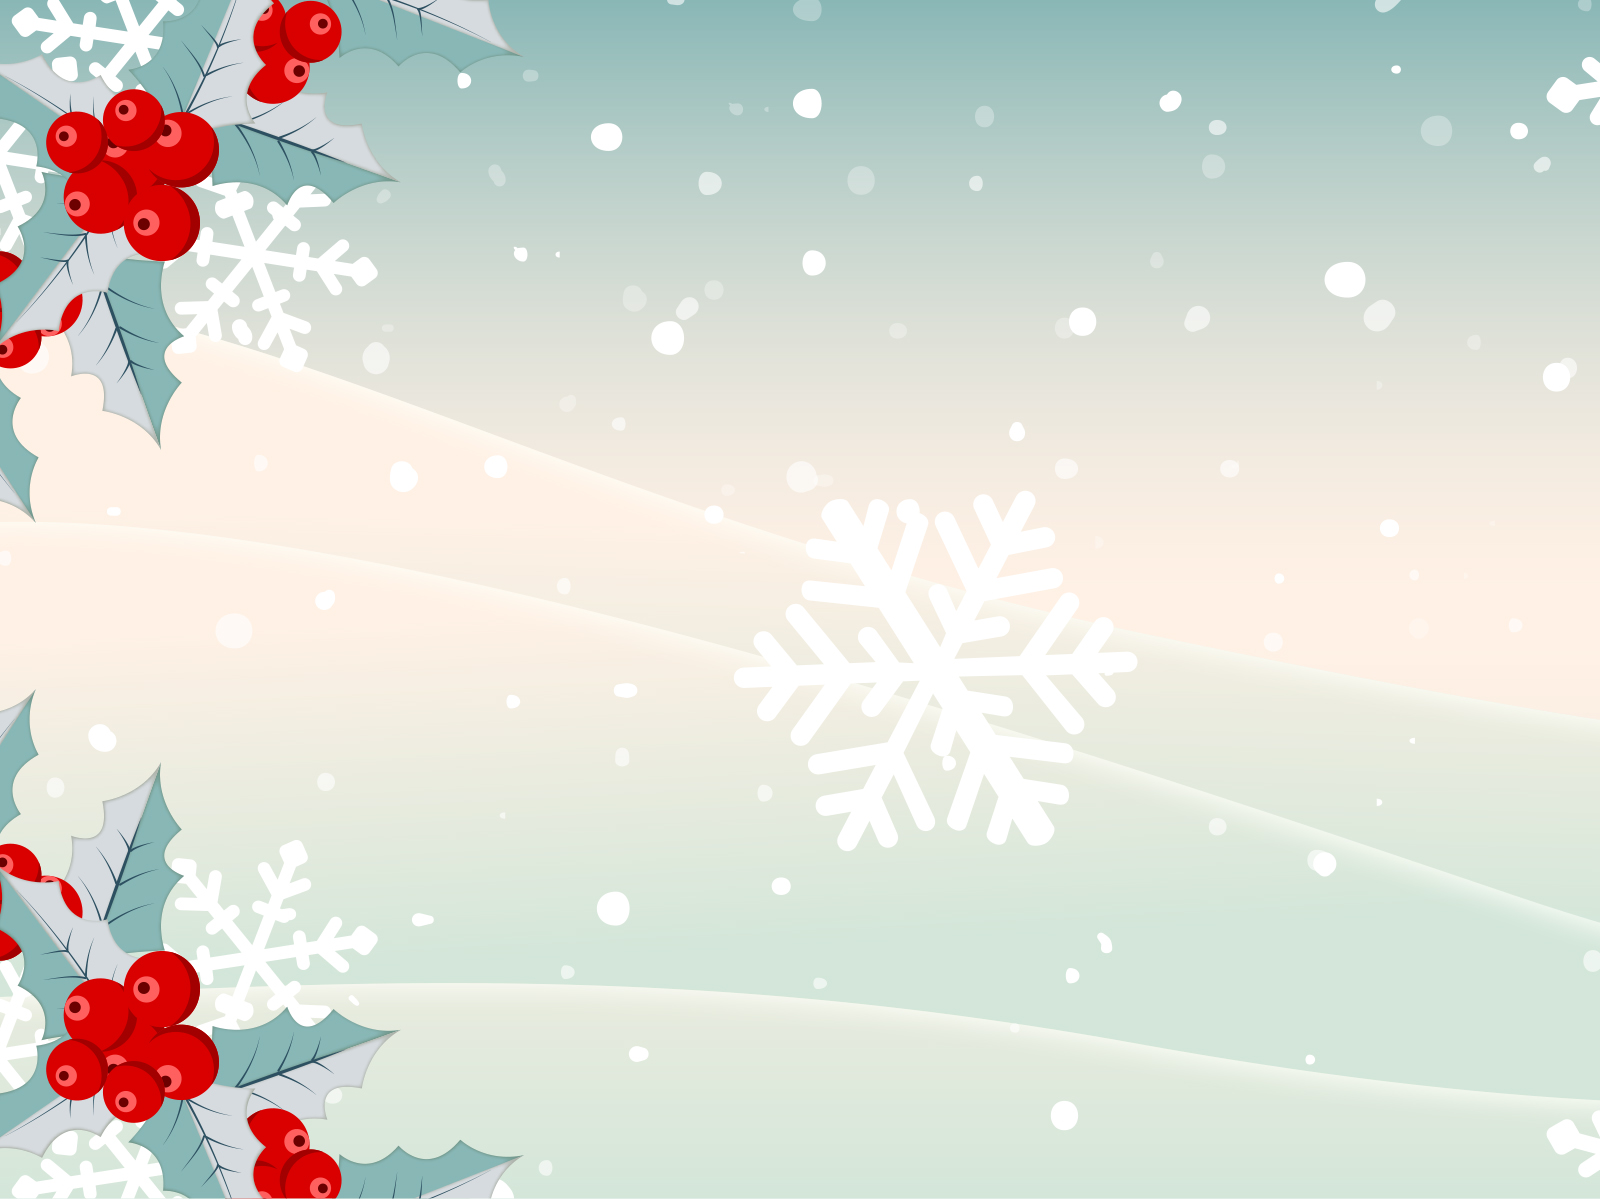 Xmas Snows PPT Backgrounds